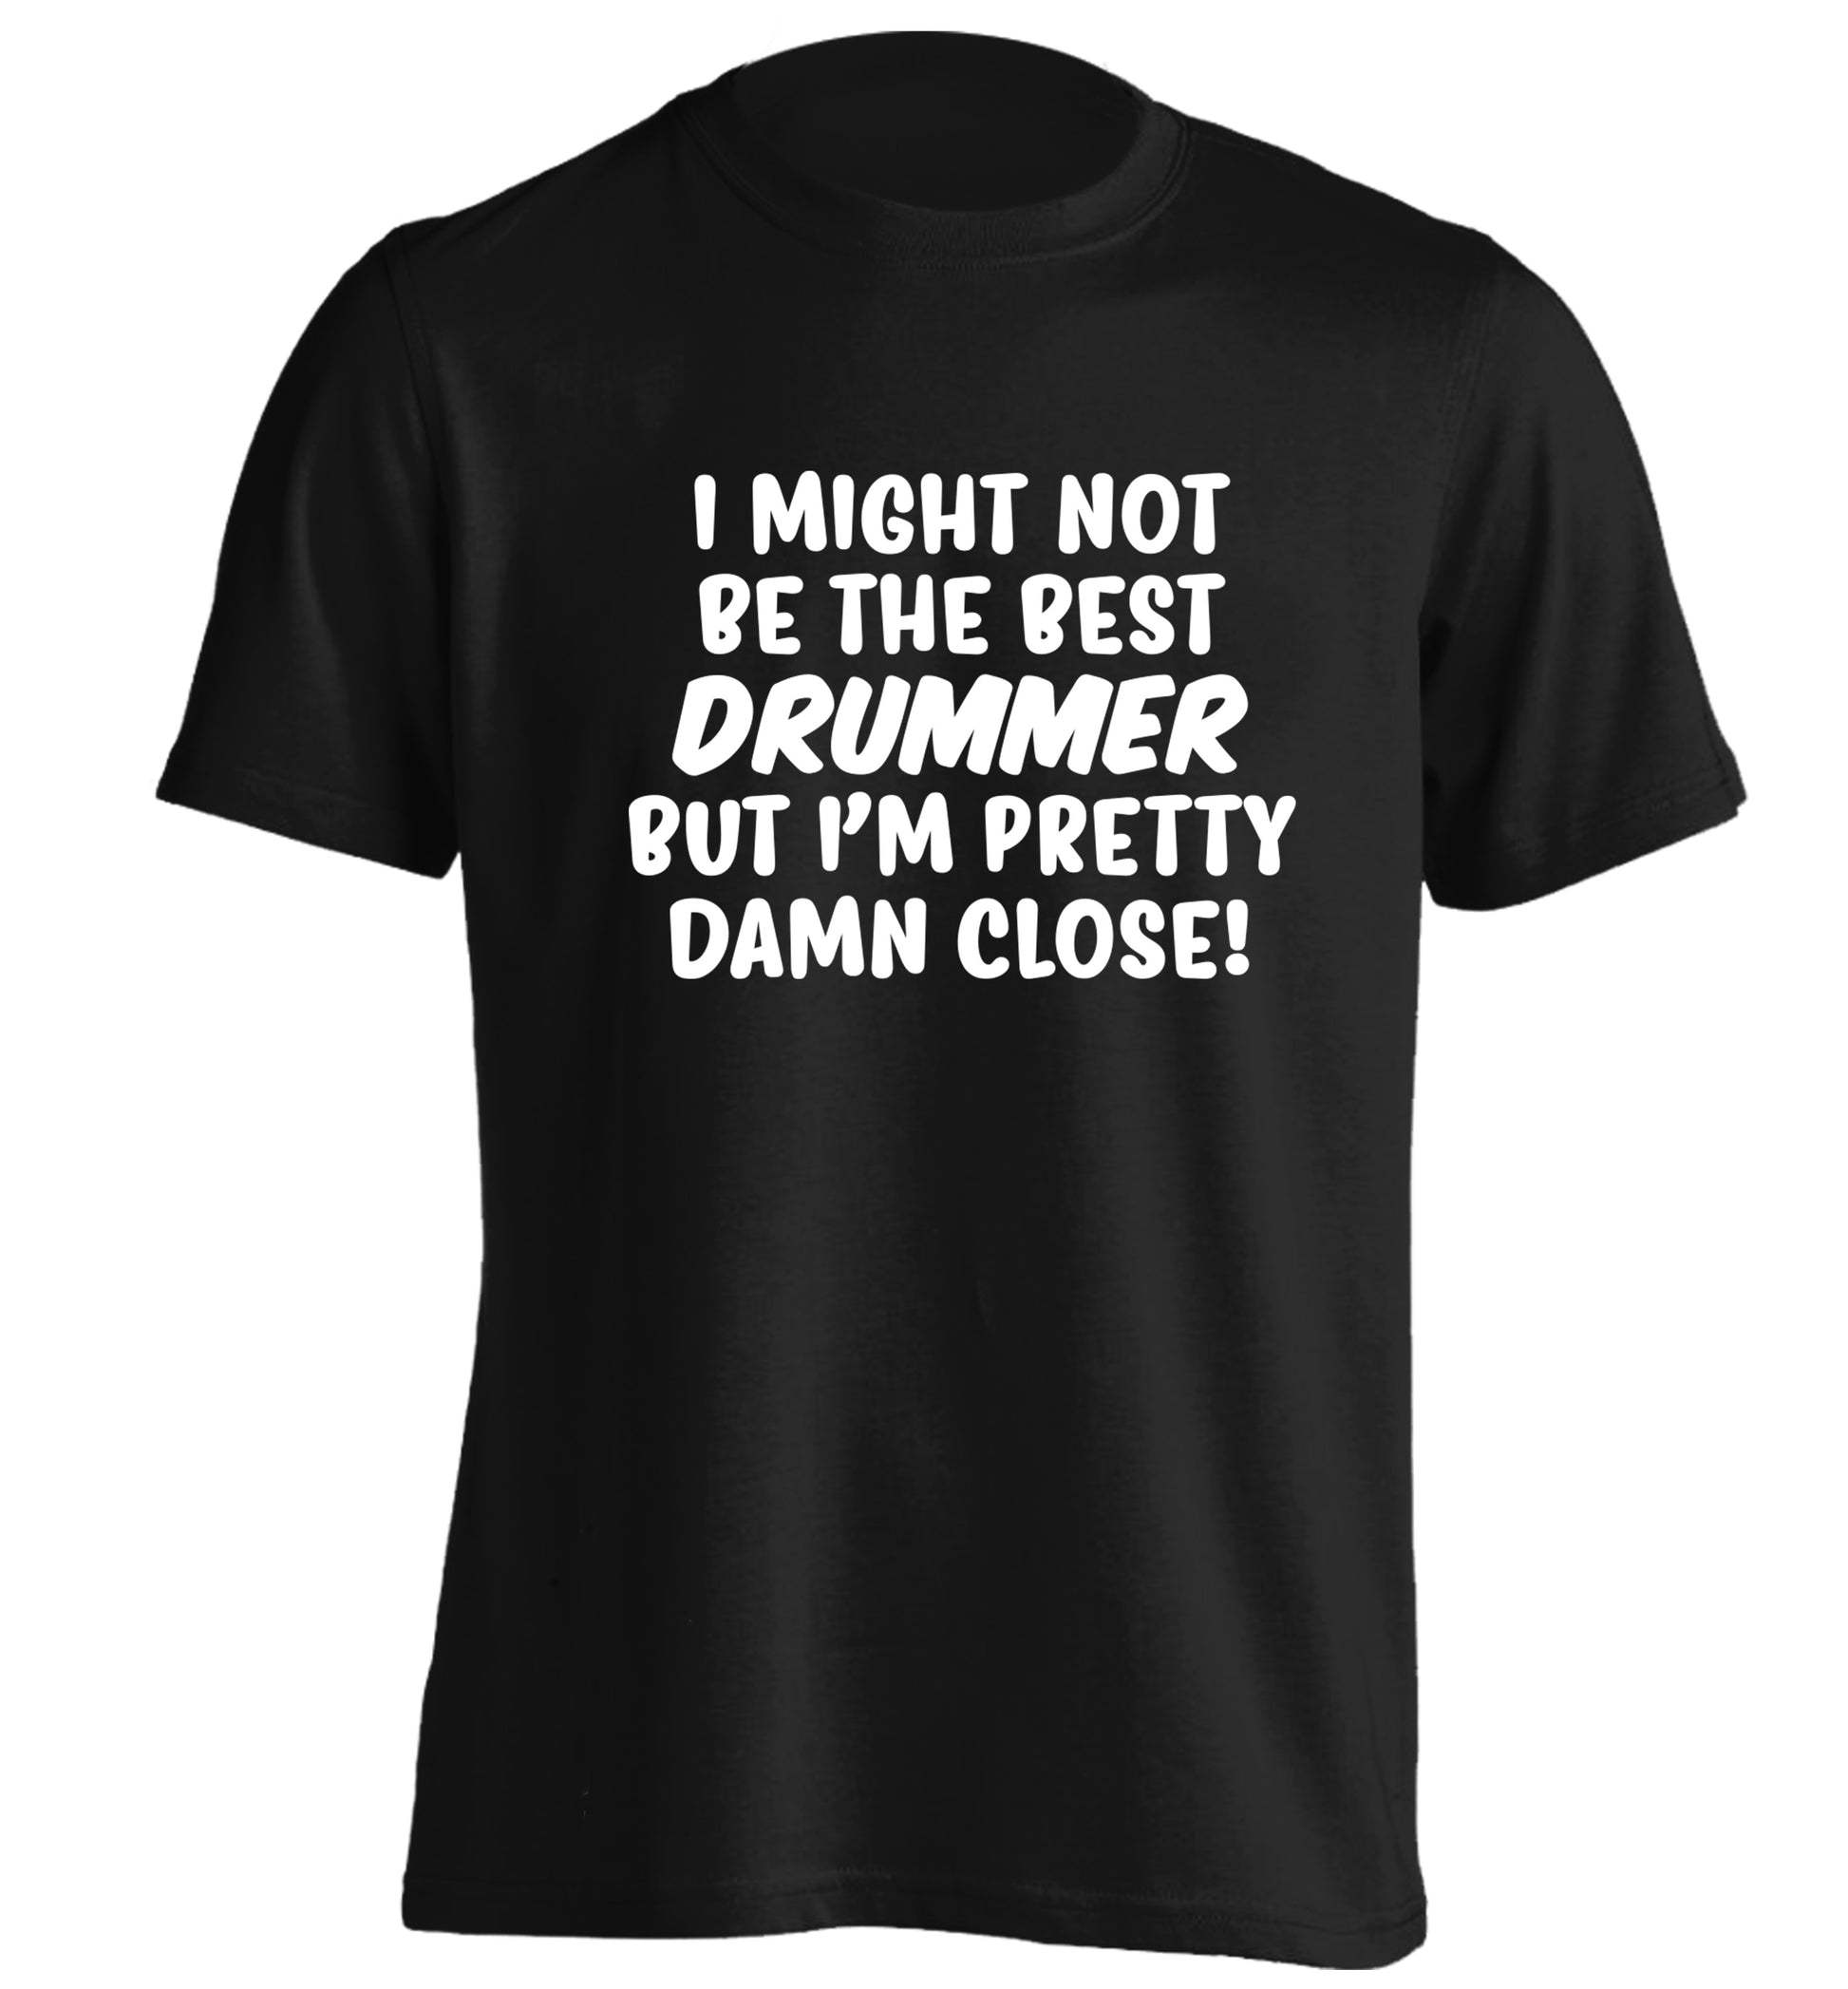 I might not be the best drummer but I'm pretty close! adults unisexblack Tshirt 2XL